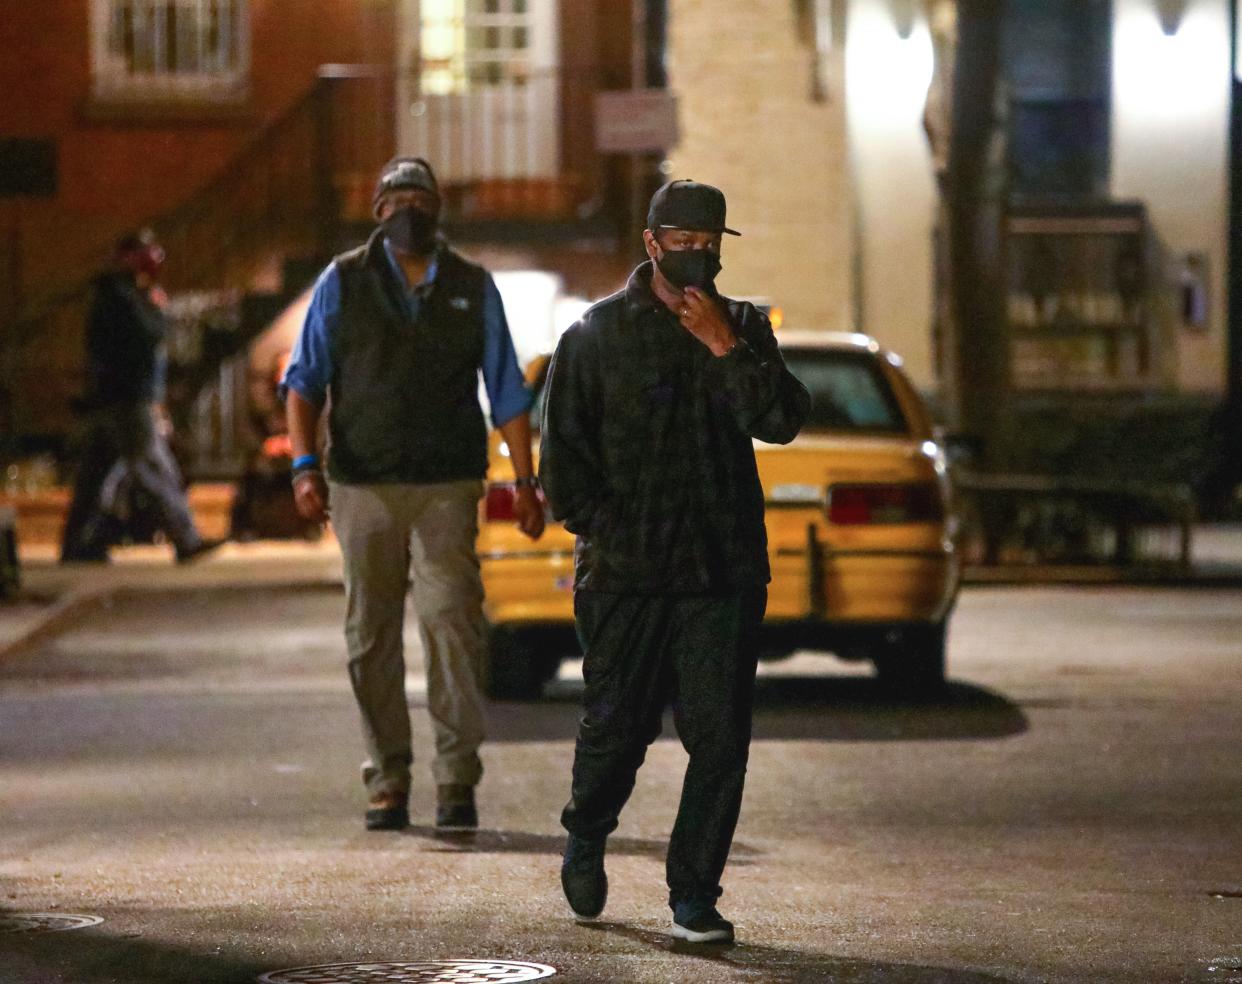 Denzel Washington is seen at the film set of the "Journal for Jordan" on March 28, 2021, in New York City.